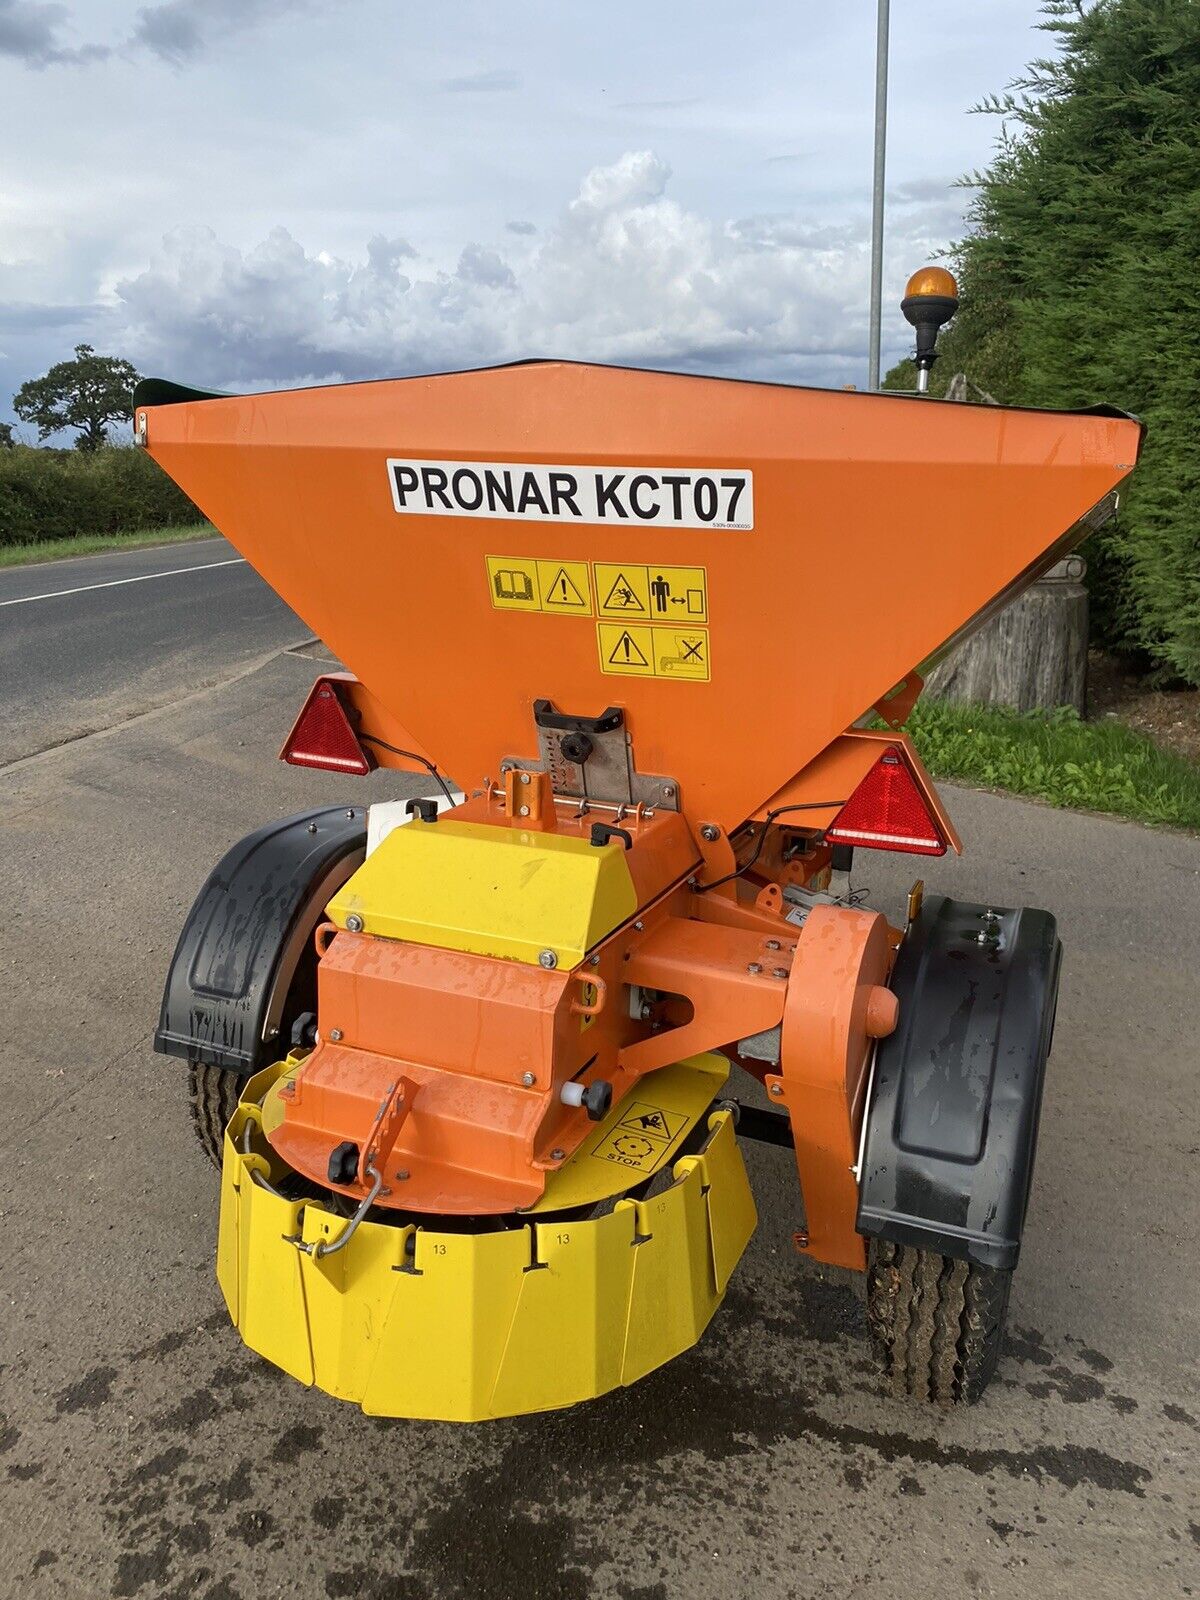 NEW AND UNUSED PRONAR KCT07 TOW ALONG HYDRAULIC GRITTER SALTER SPREADER 2